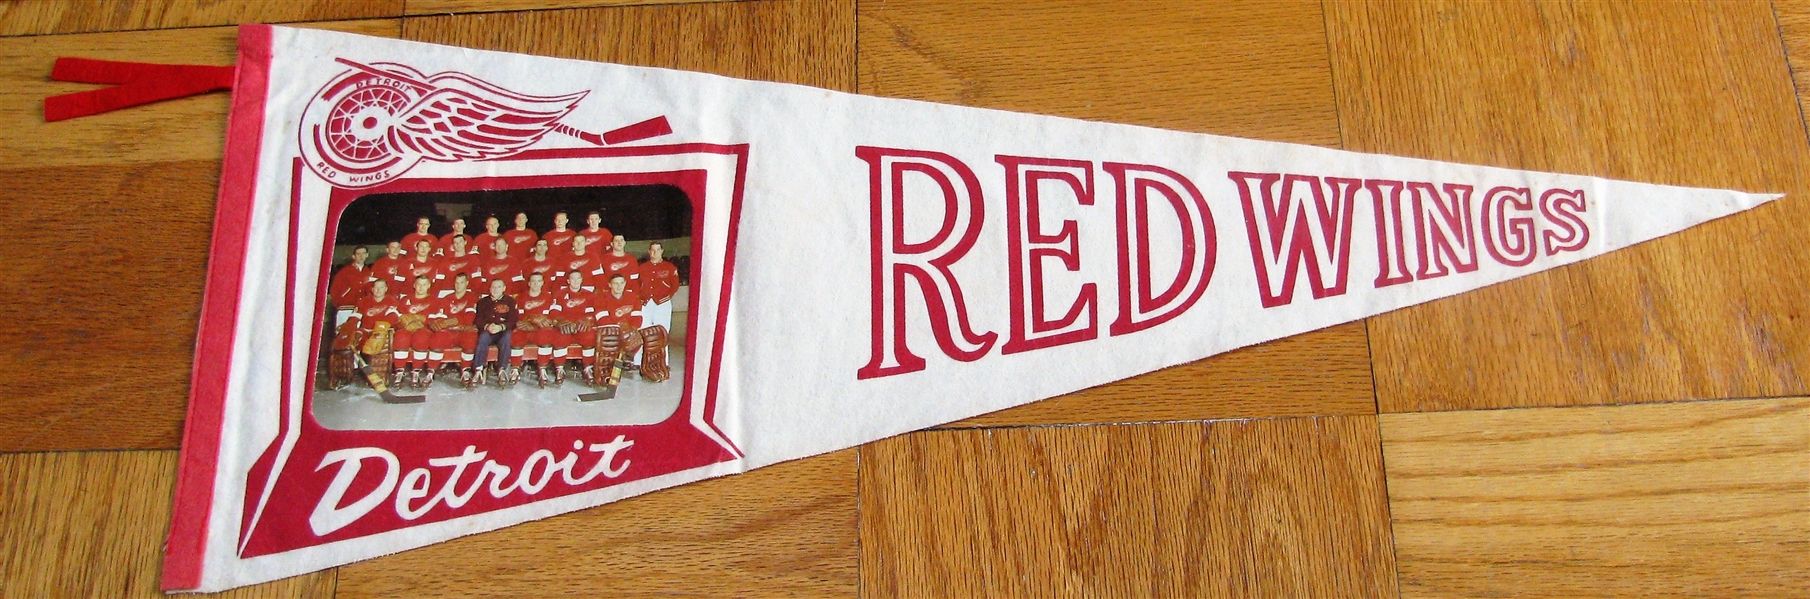 1961-62 DETROIT RED WINGS TEAM PICTURE HOCKEY PENNANT